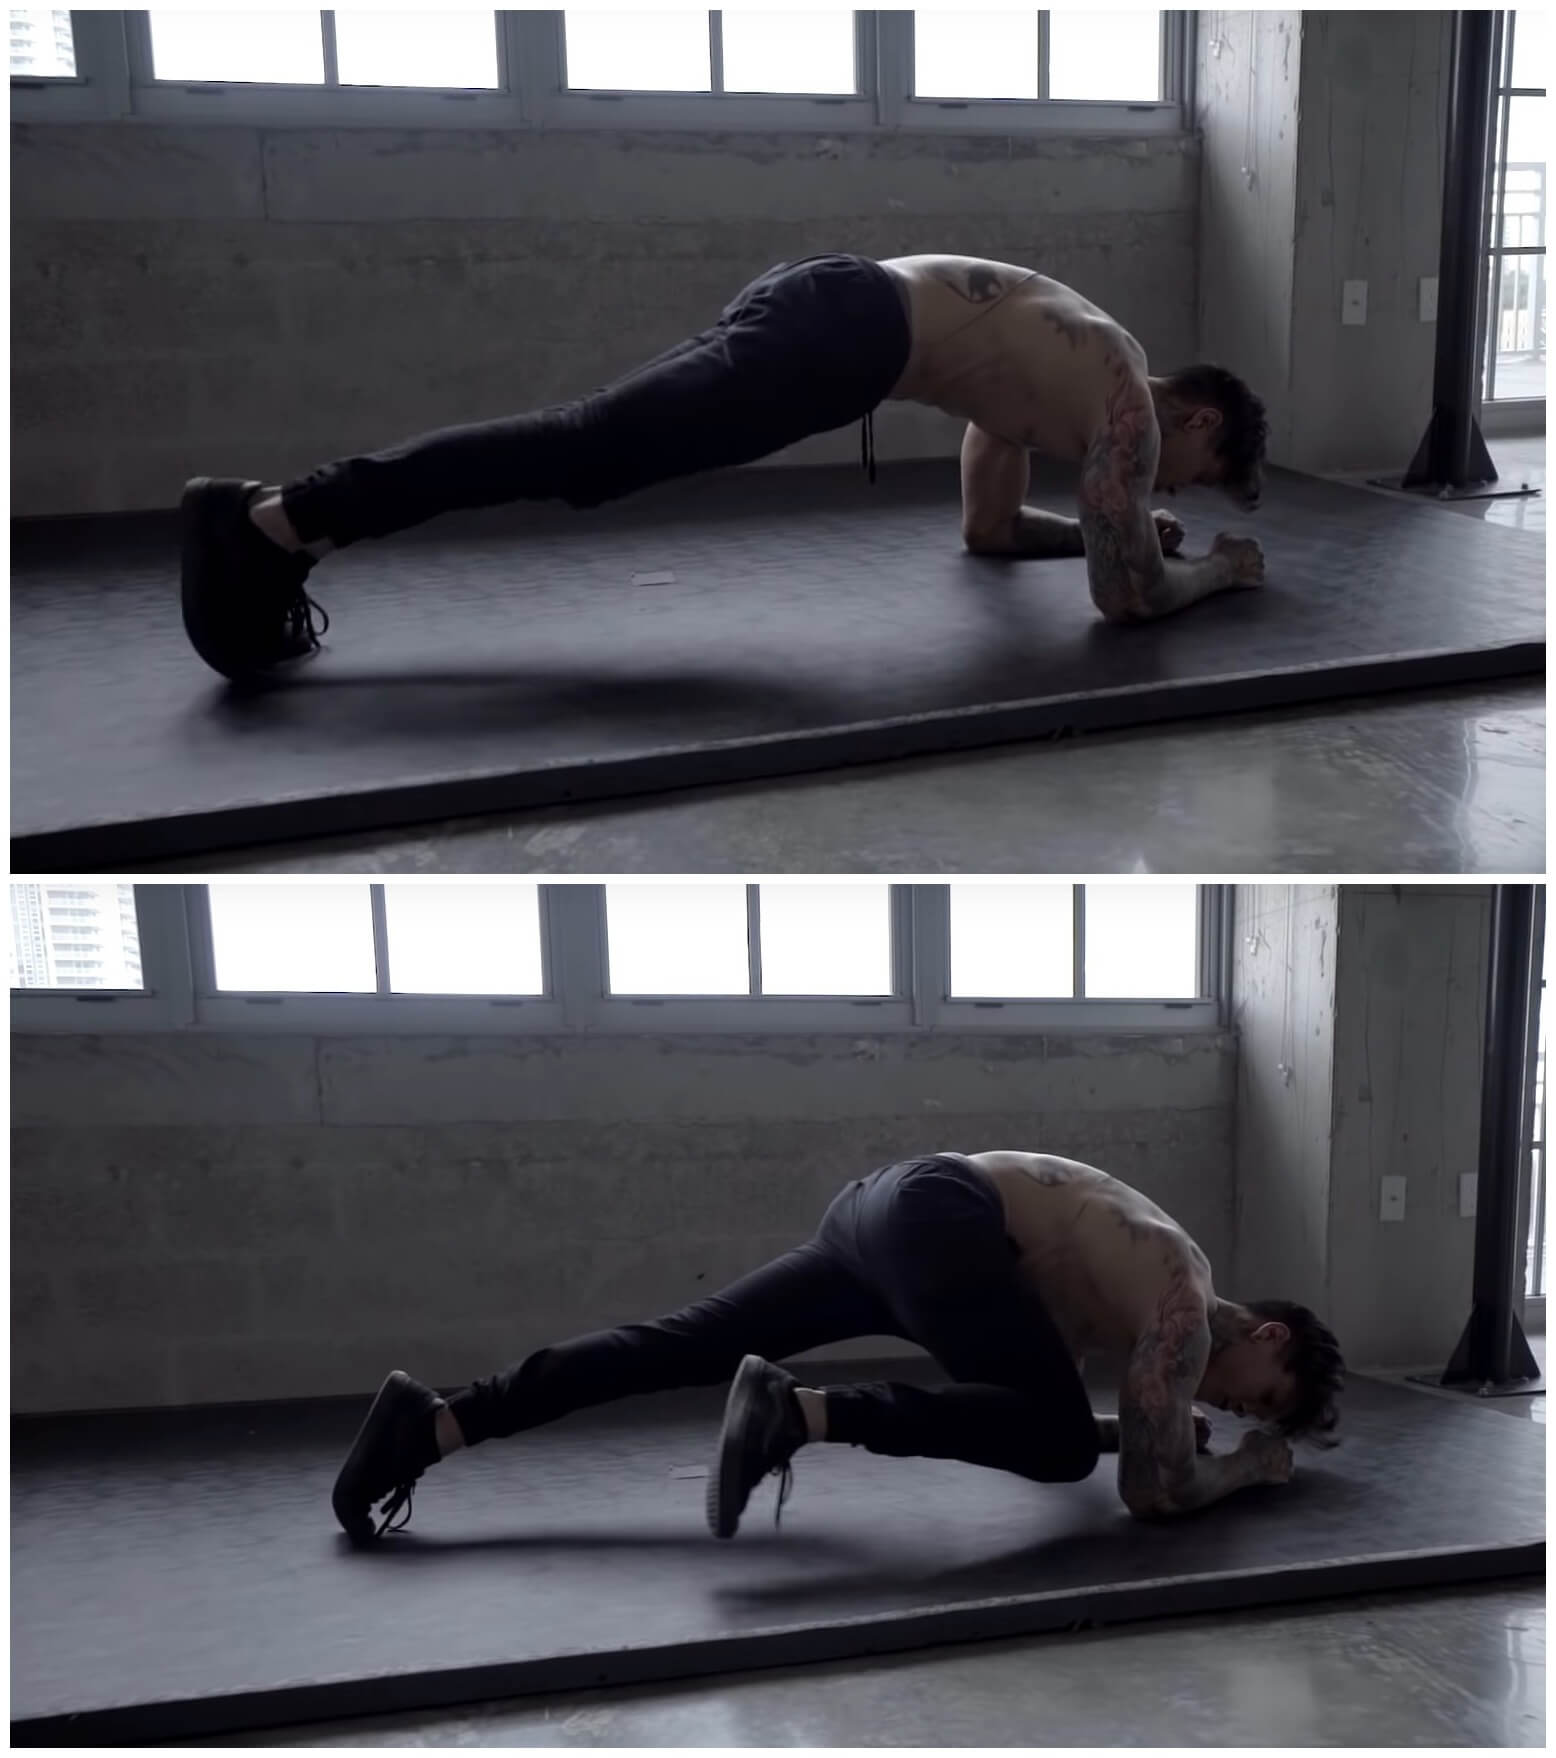 Plank knees to elbow